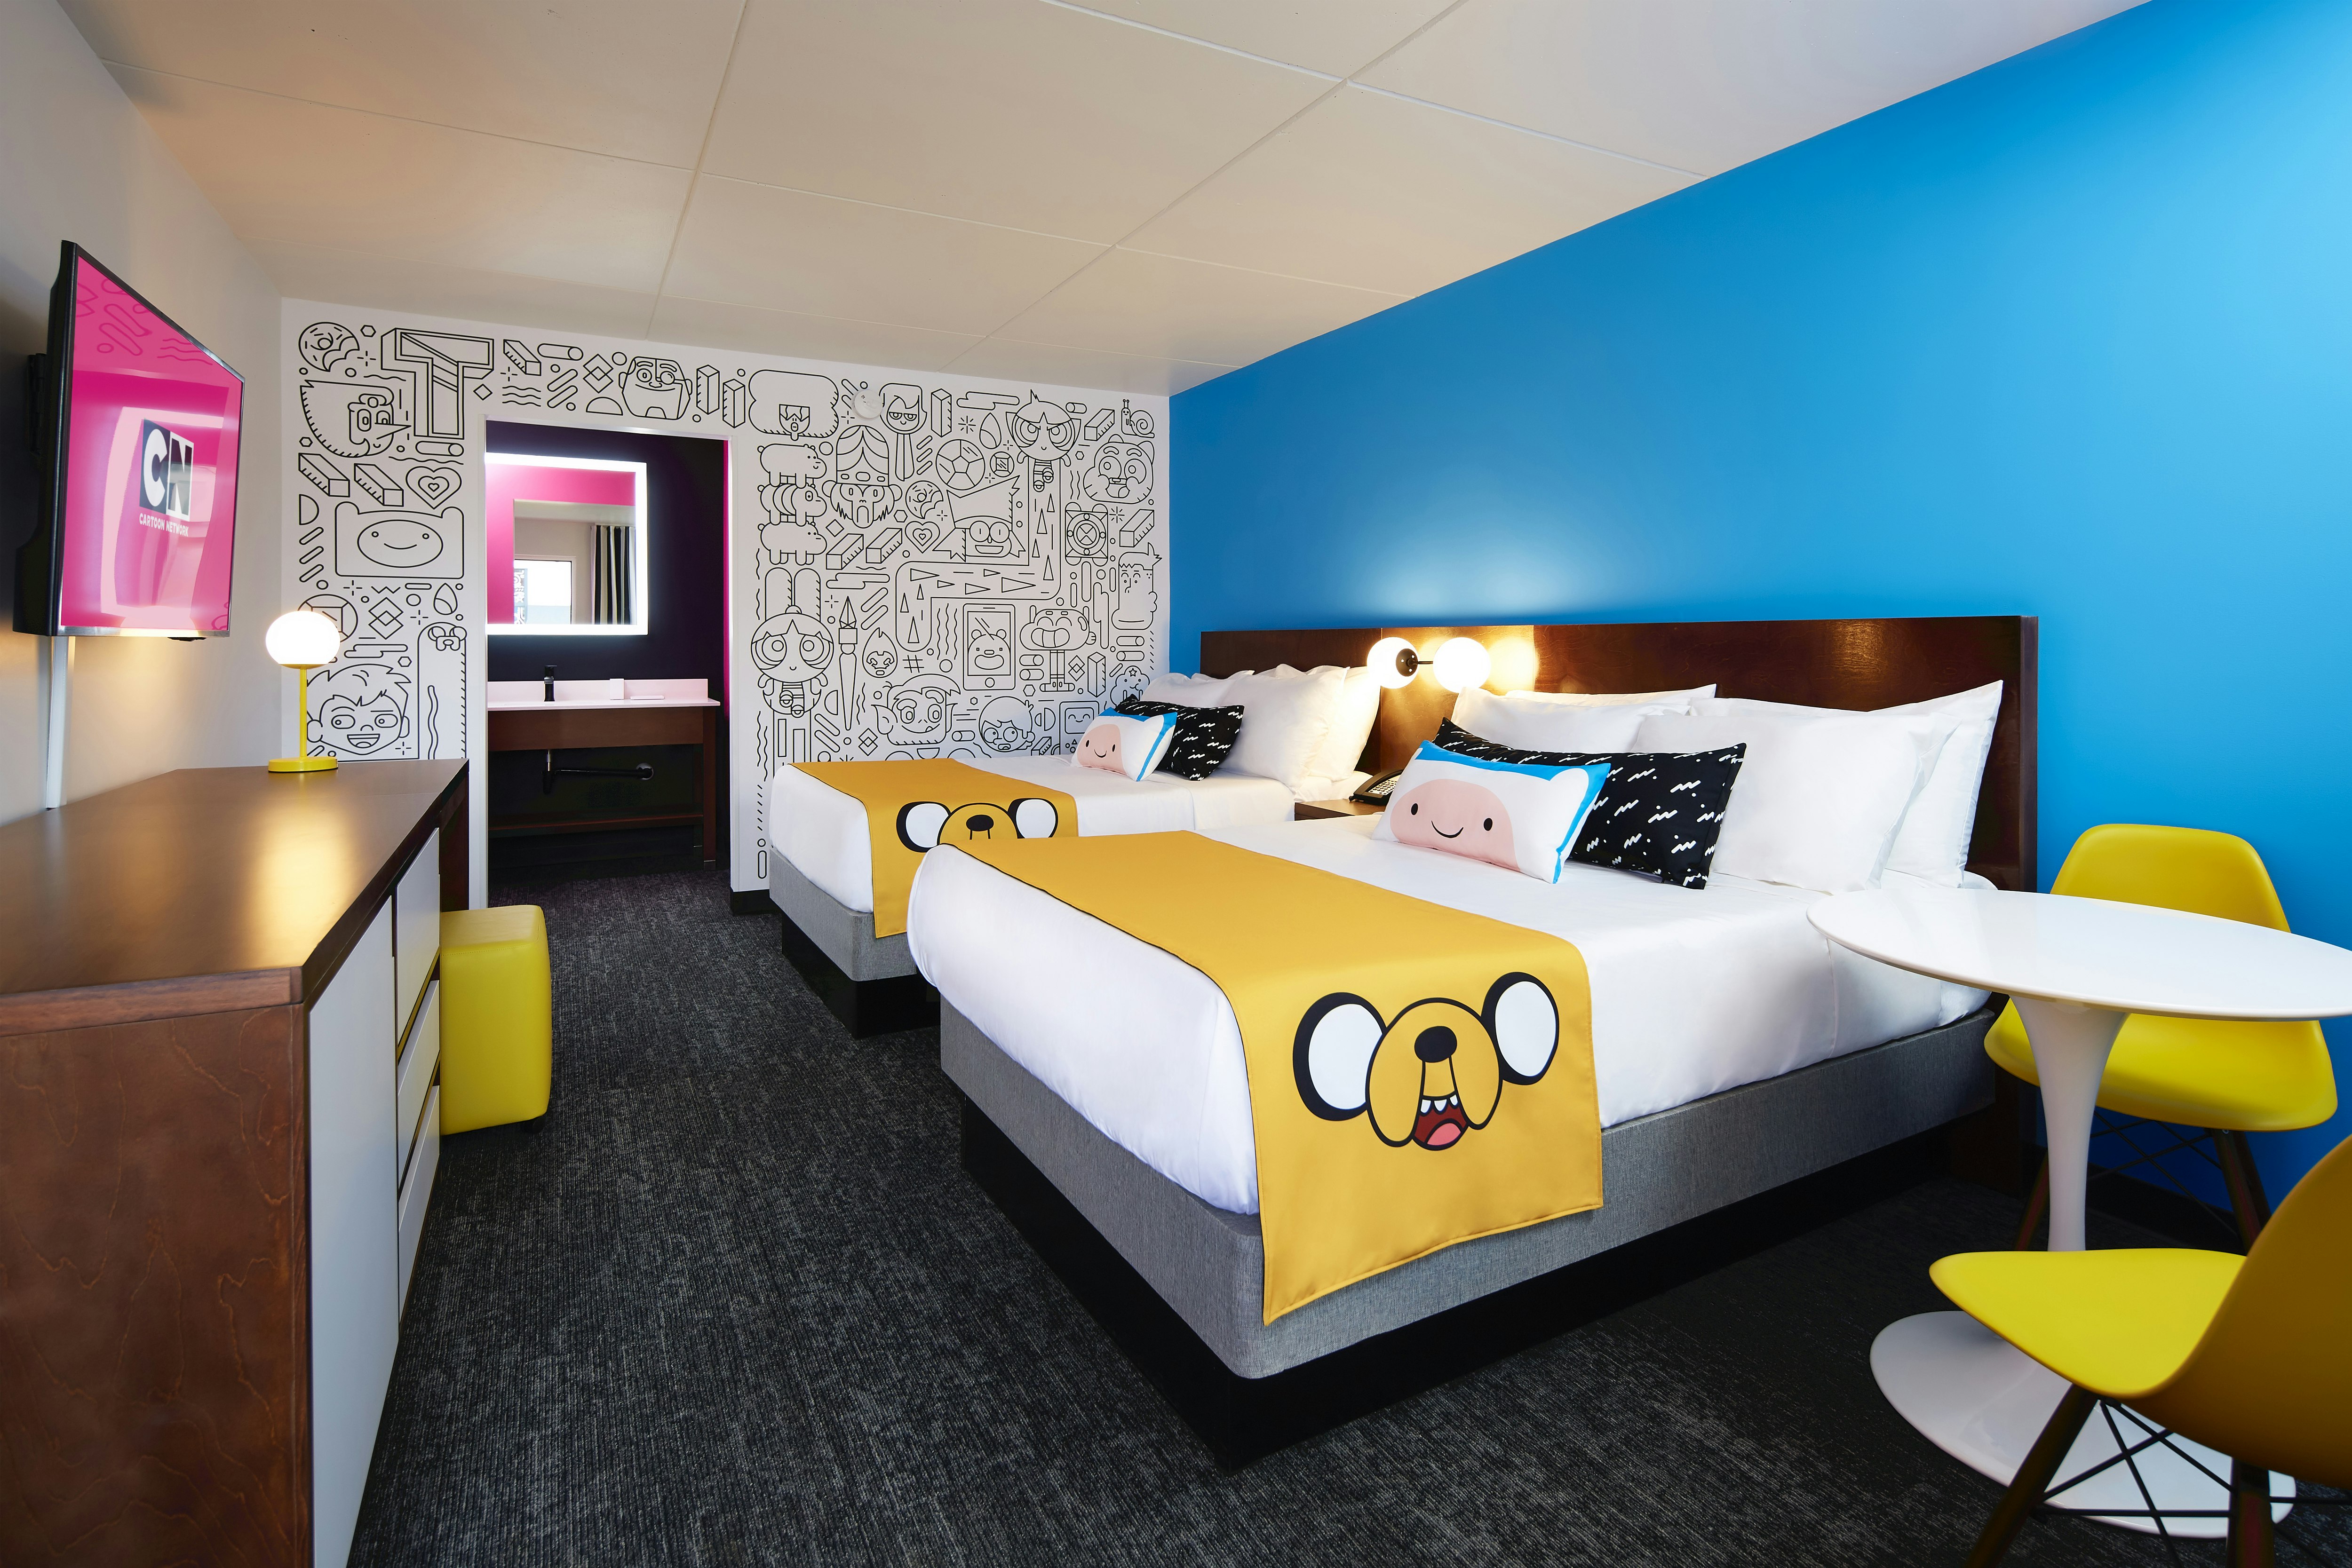 An Adventure Time cartoon-inspired room at the Cartoon Network Hotel